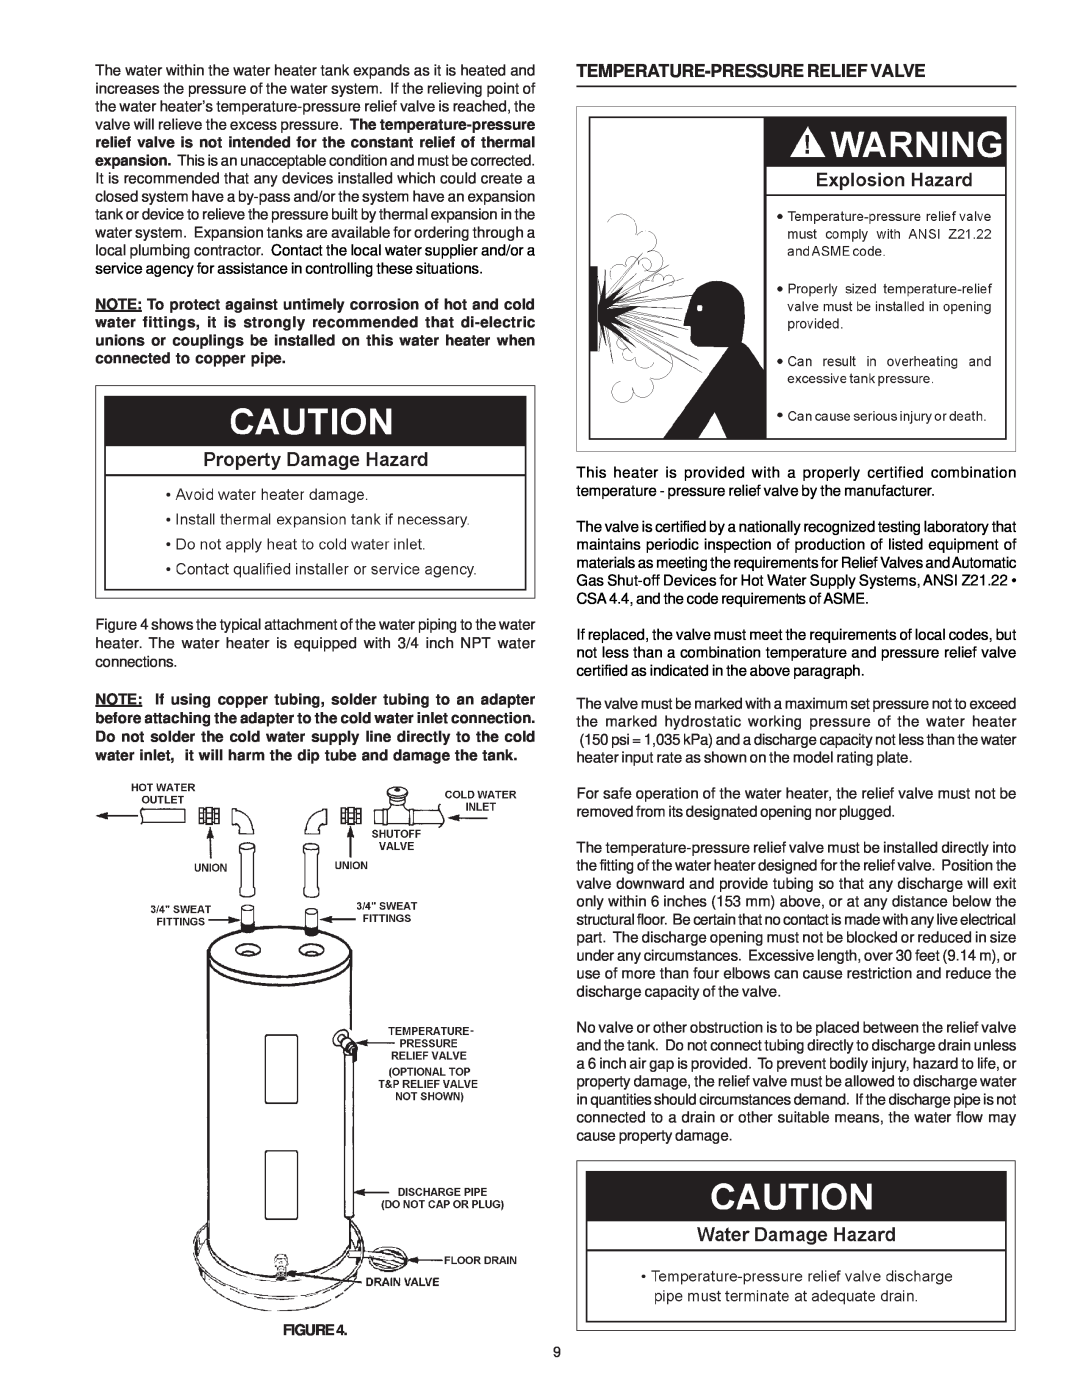 A.O. Smith WATER HEATERS instruction manual Temperature-Pressurerelief Valve 